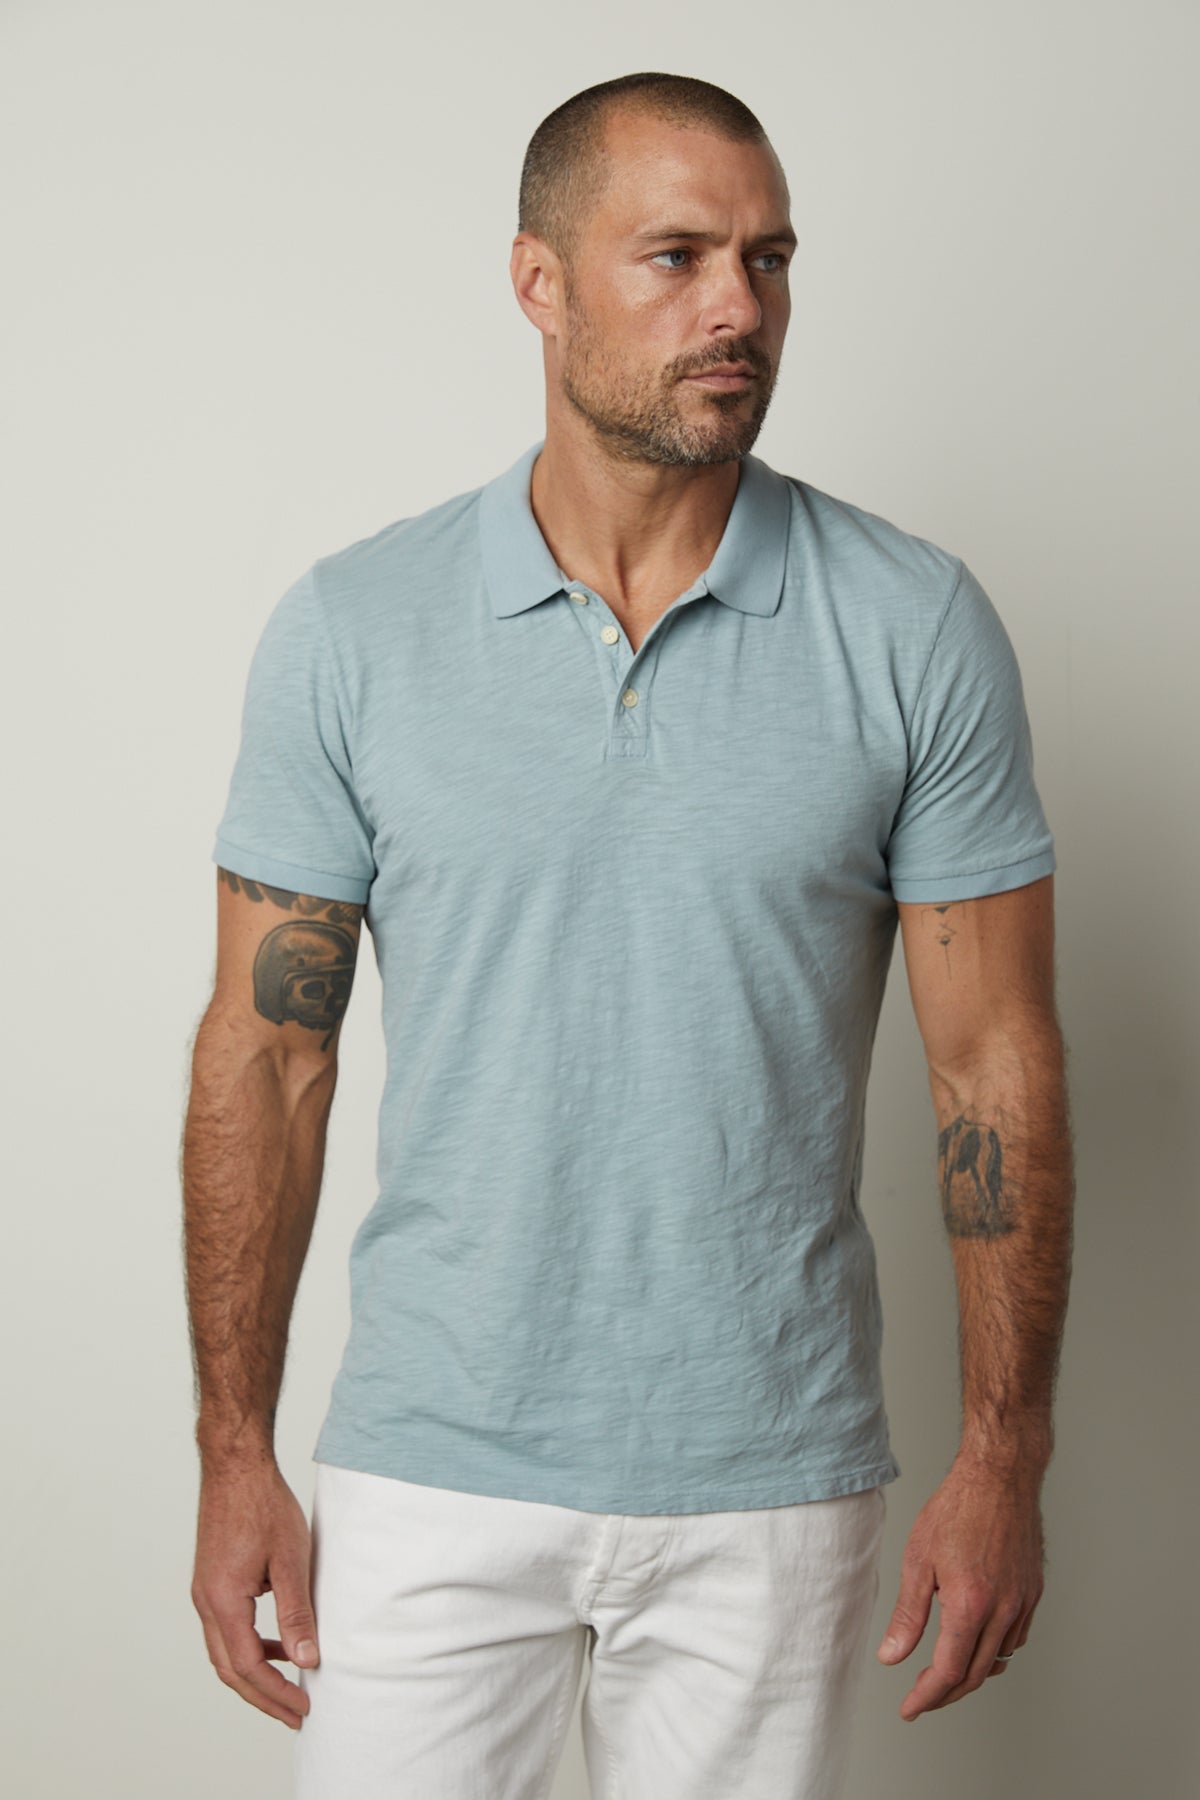 Niko Polo in Ojai Short Sleeve Collared Shirt with white pants front view -35783017922753